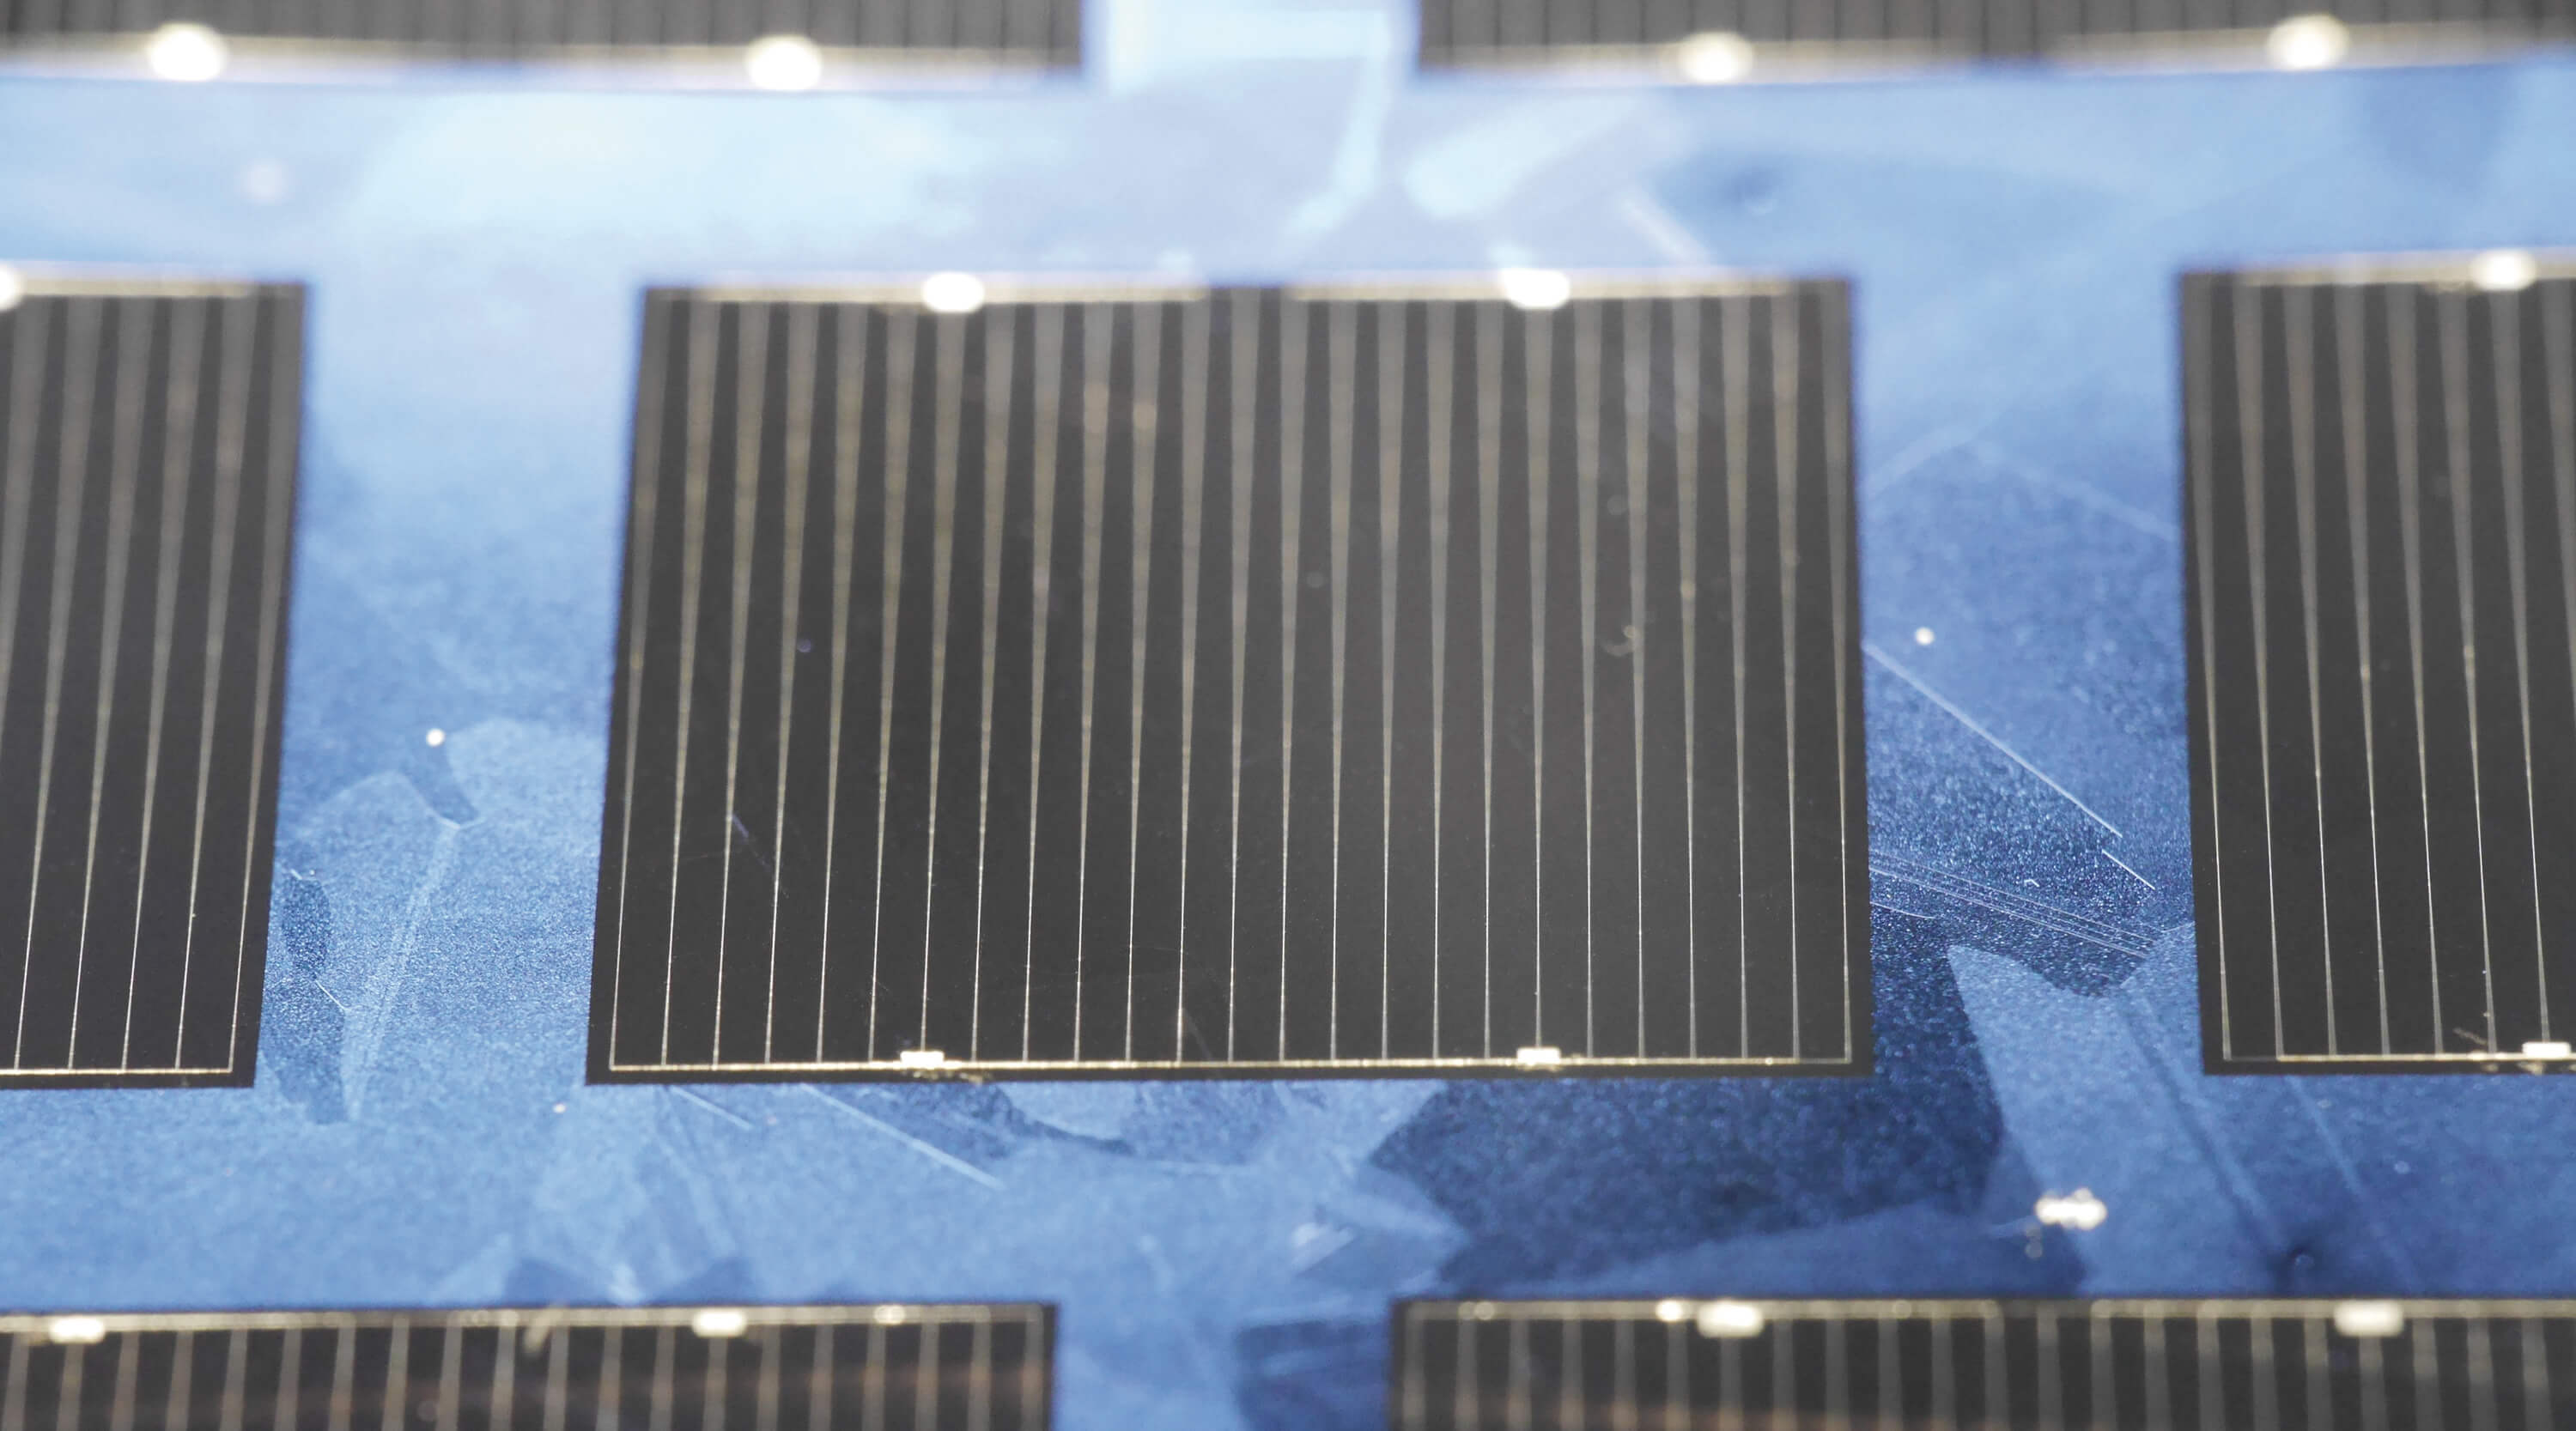 World record multicrystalline silicon solar cell with 22.3 percent efficiency